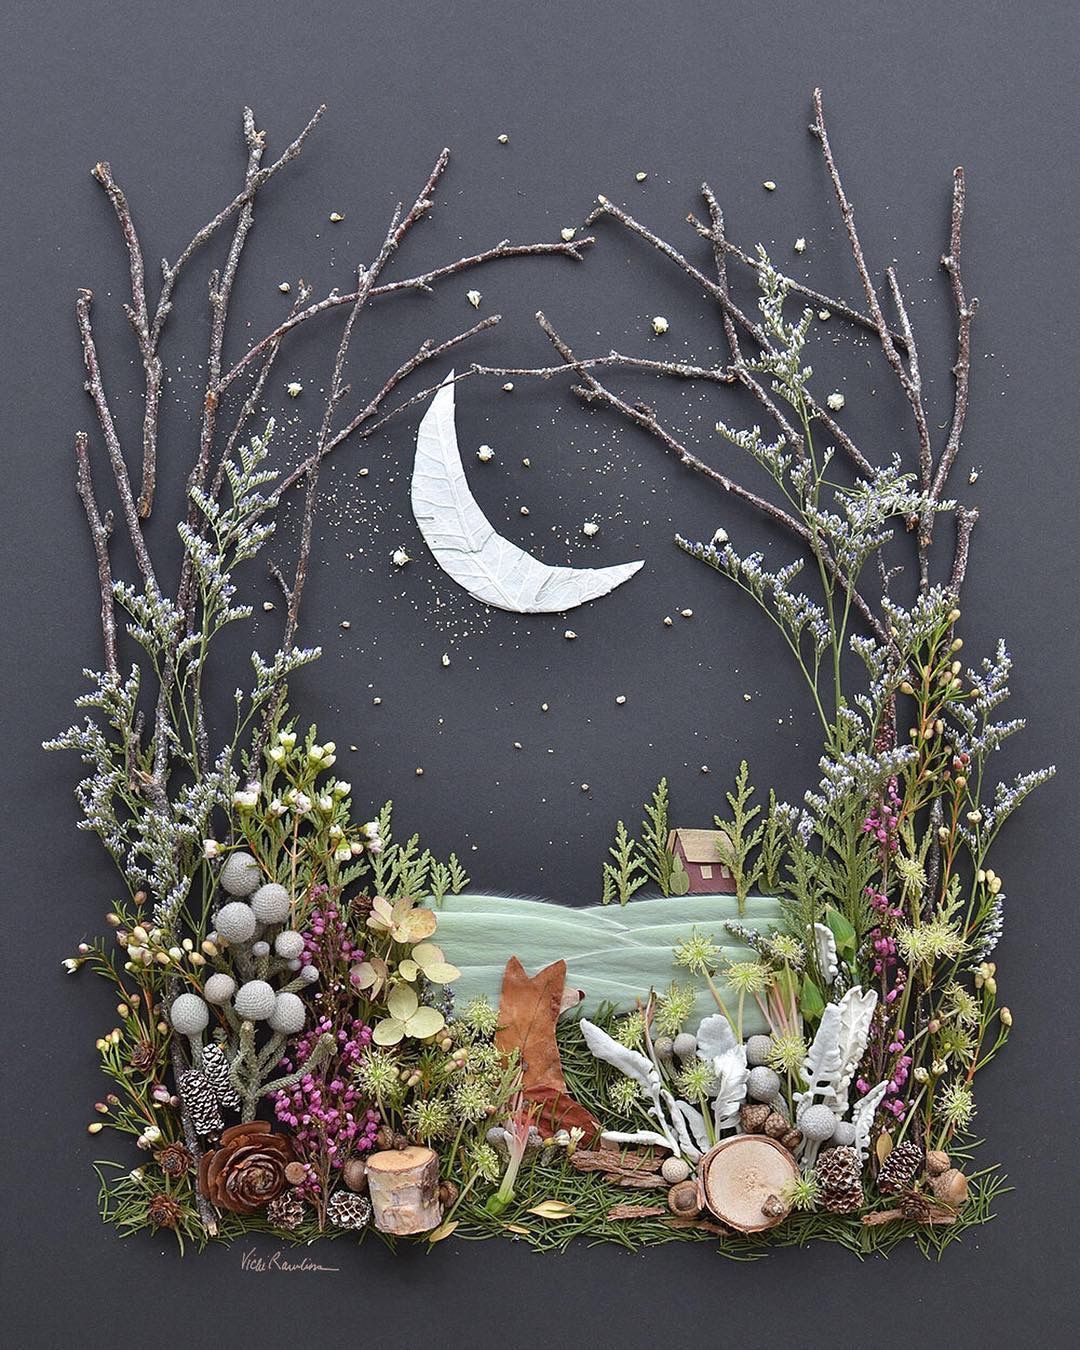 Fox art out of natural materials -   25 nature crafts flowers
 ideas